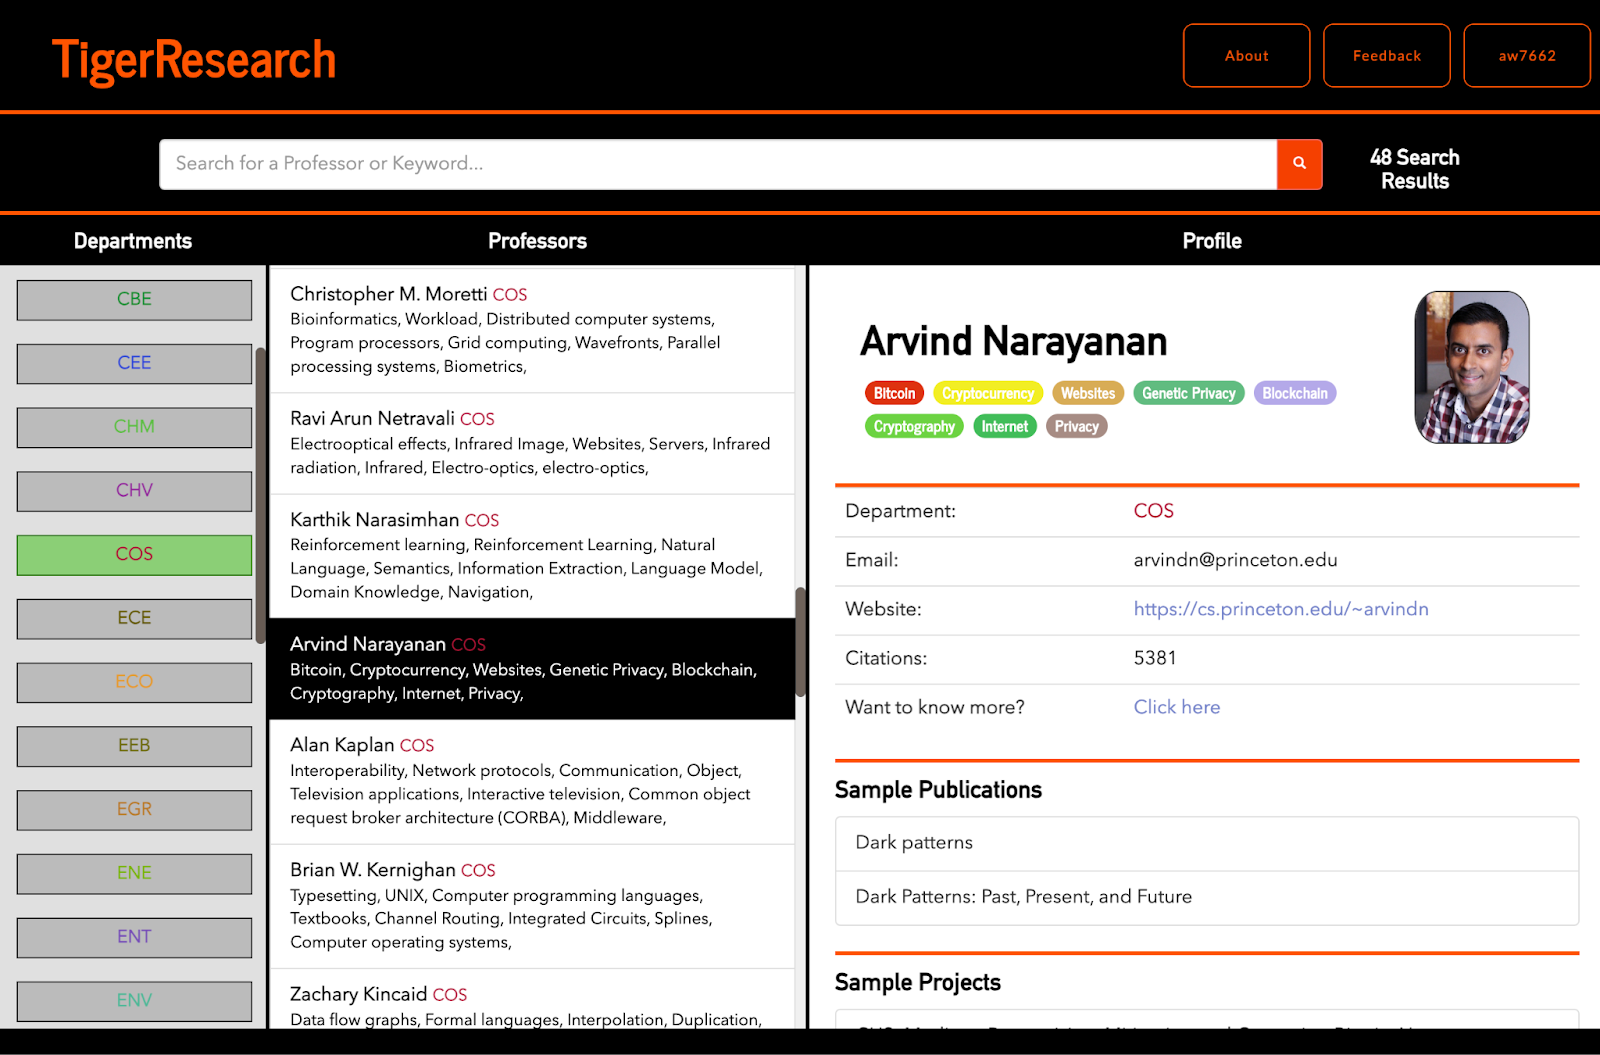 Image of TigerResearch with Professor Arvind Narayanan's research profile